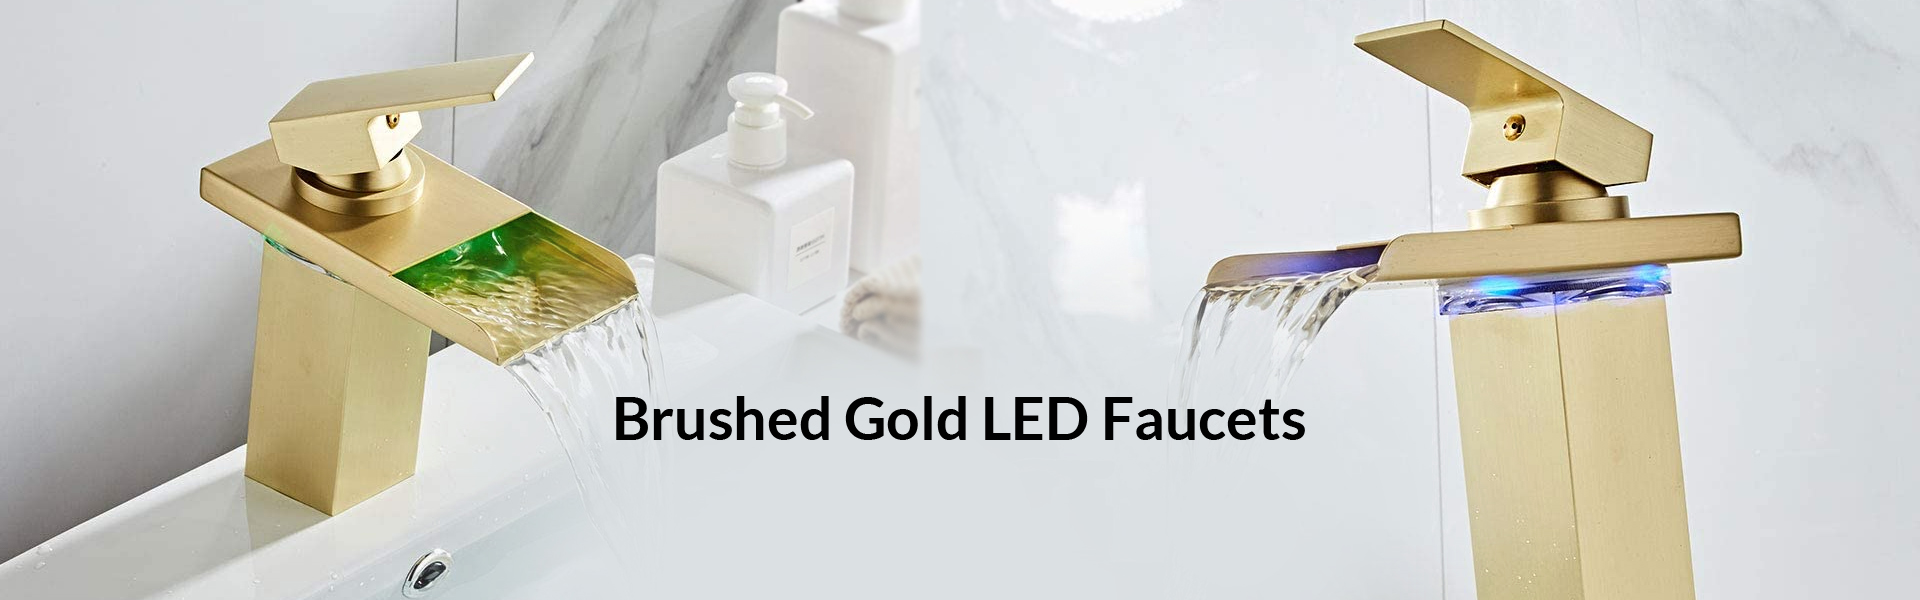 Brushed Gold LED Faucets